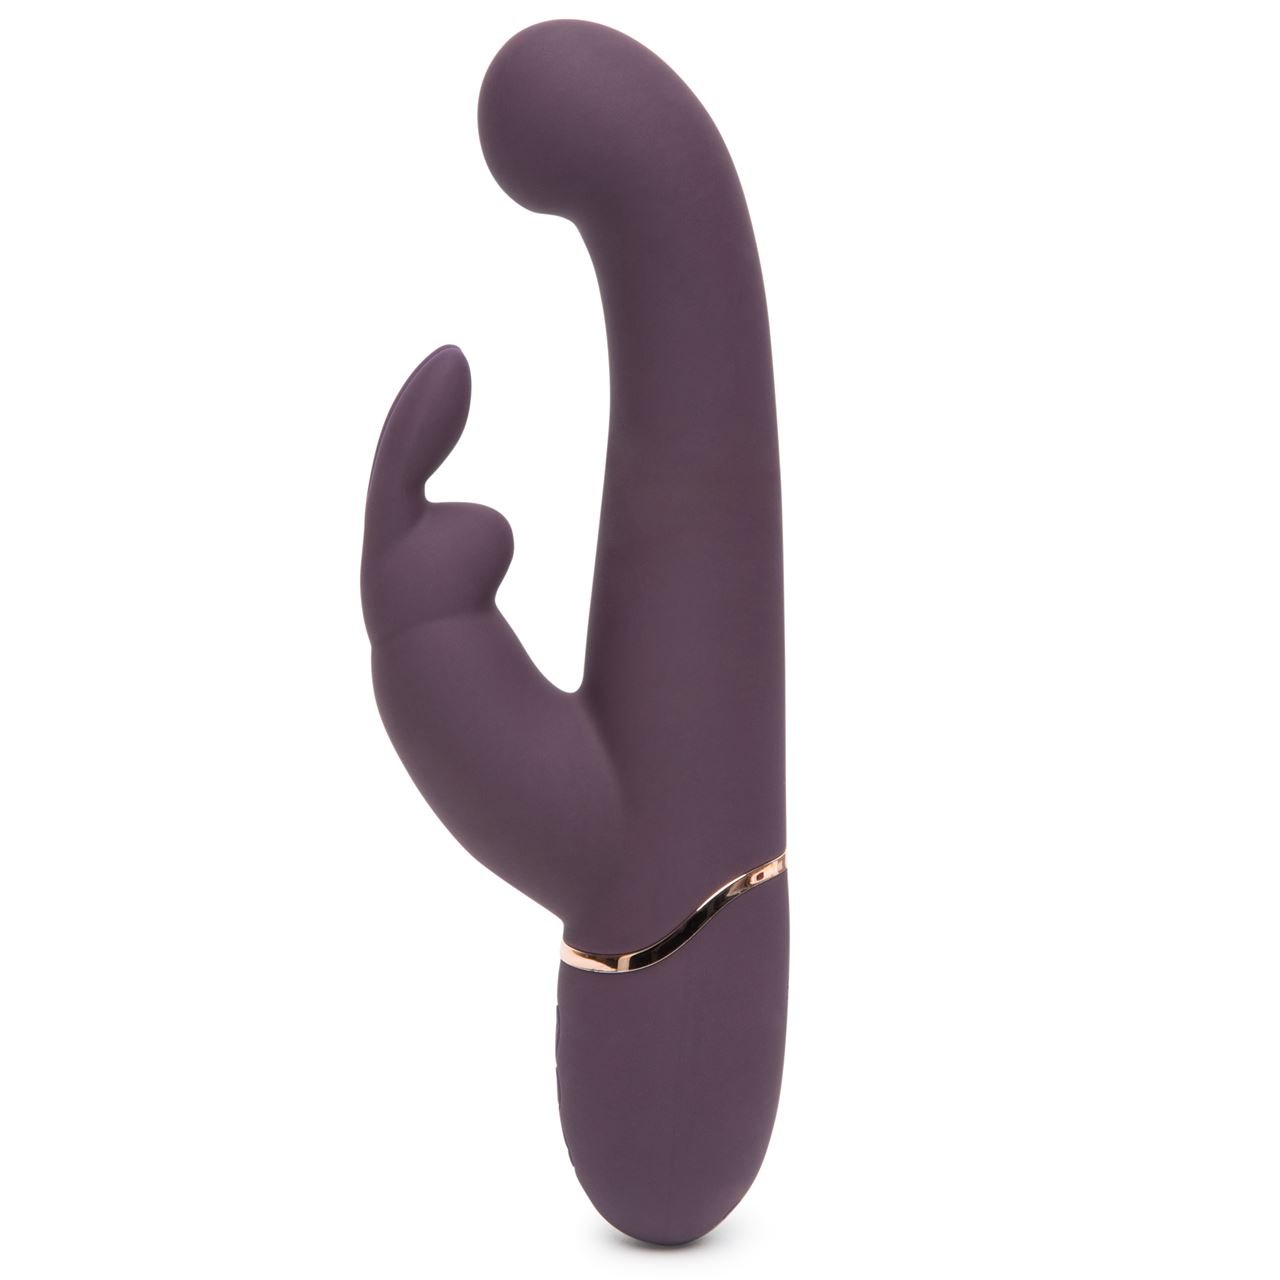 0015184_fifty-shades-freed-come-to-bed-rechargeable-slimline-rabbit-vibrator.jpeg